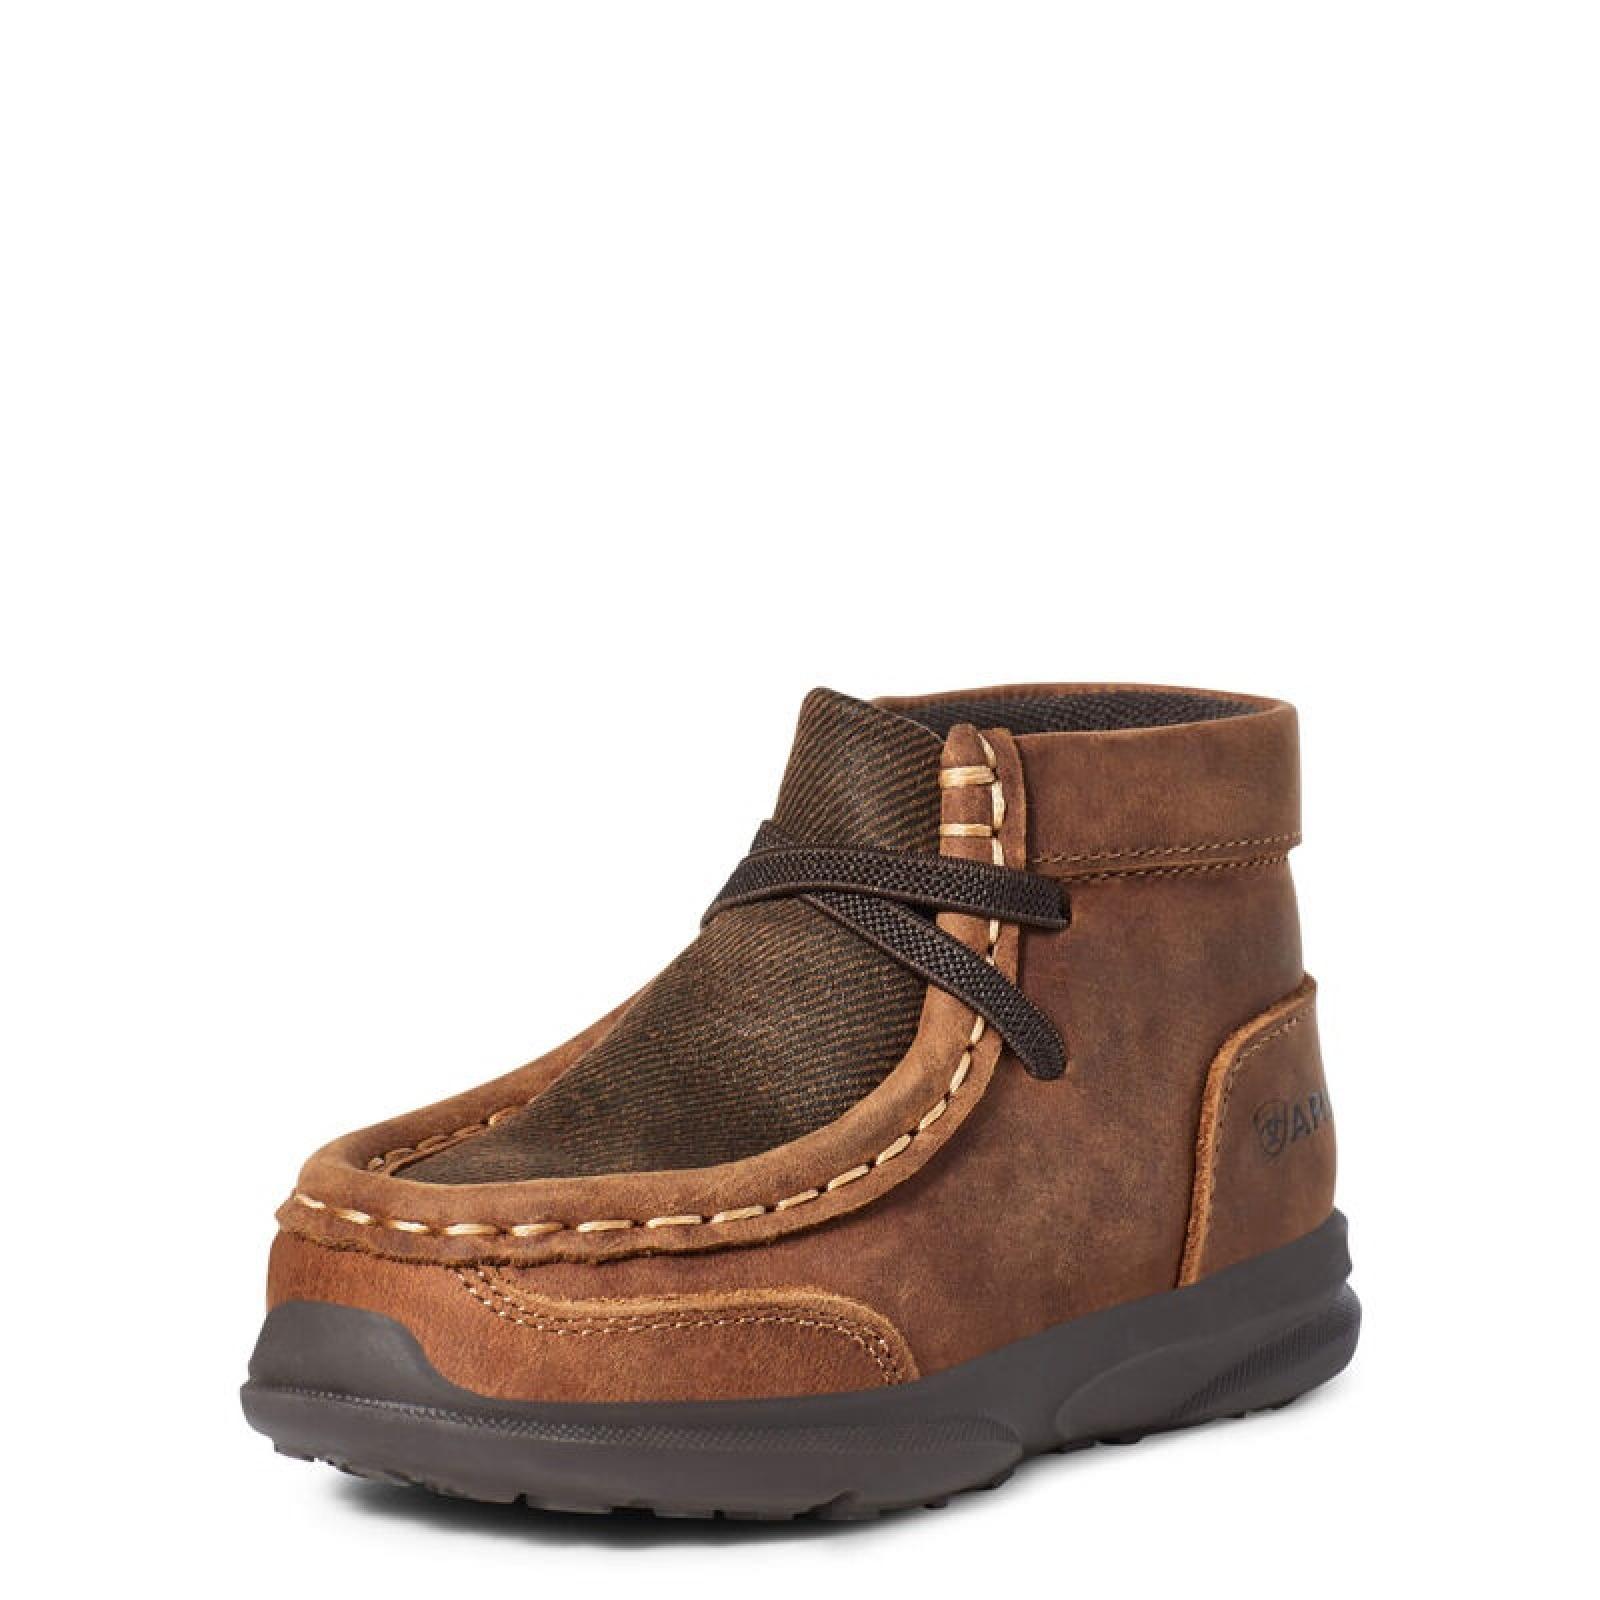 Ariat Lil' Stompers Toddler Heath Spitfire Casual